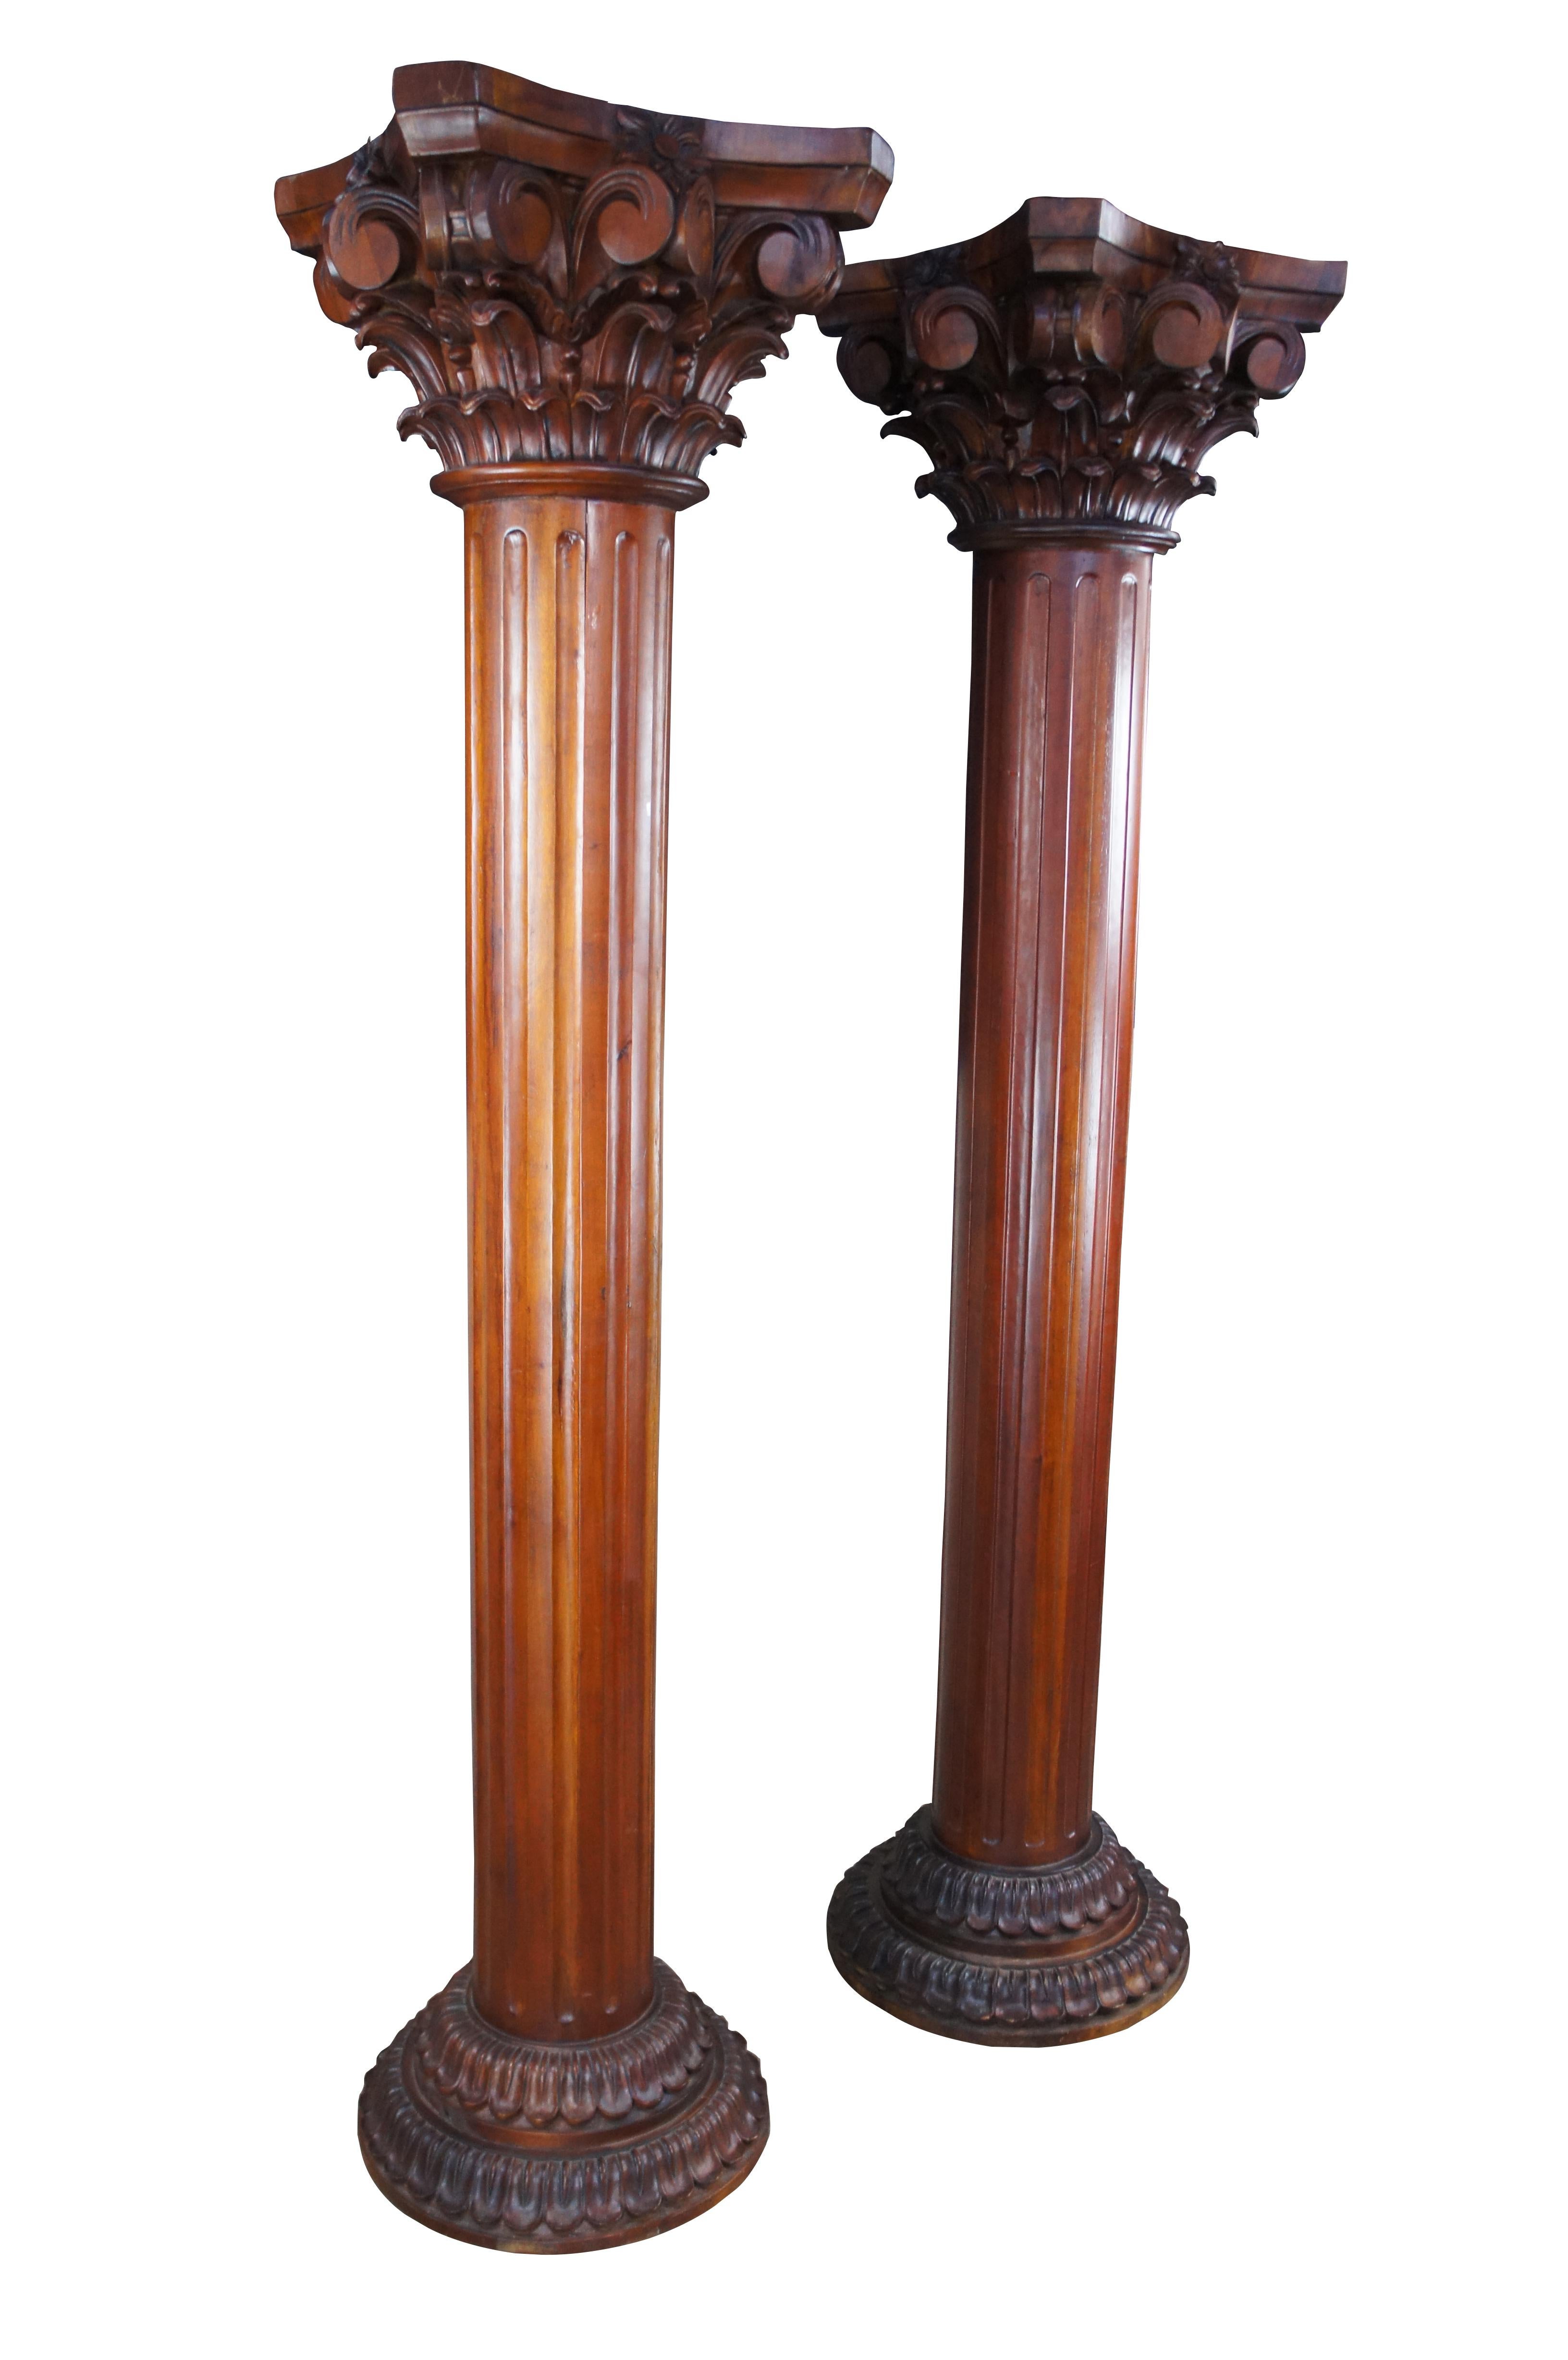 A massive pair of late 20th century mahogany Grecian style columns. Each showcases a large carved capital over a fluted center and tiered foliate base. Great for ornamental use or display. The two columns could be used for display or functioning as